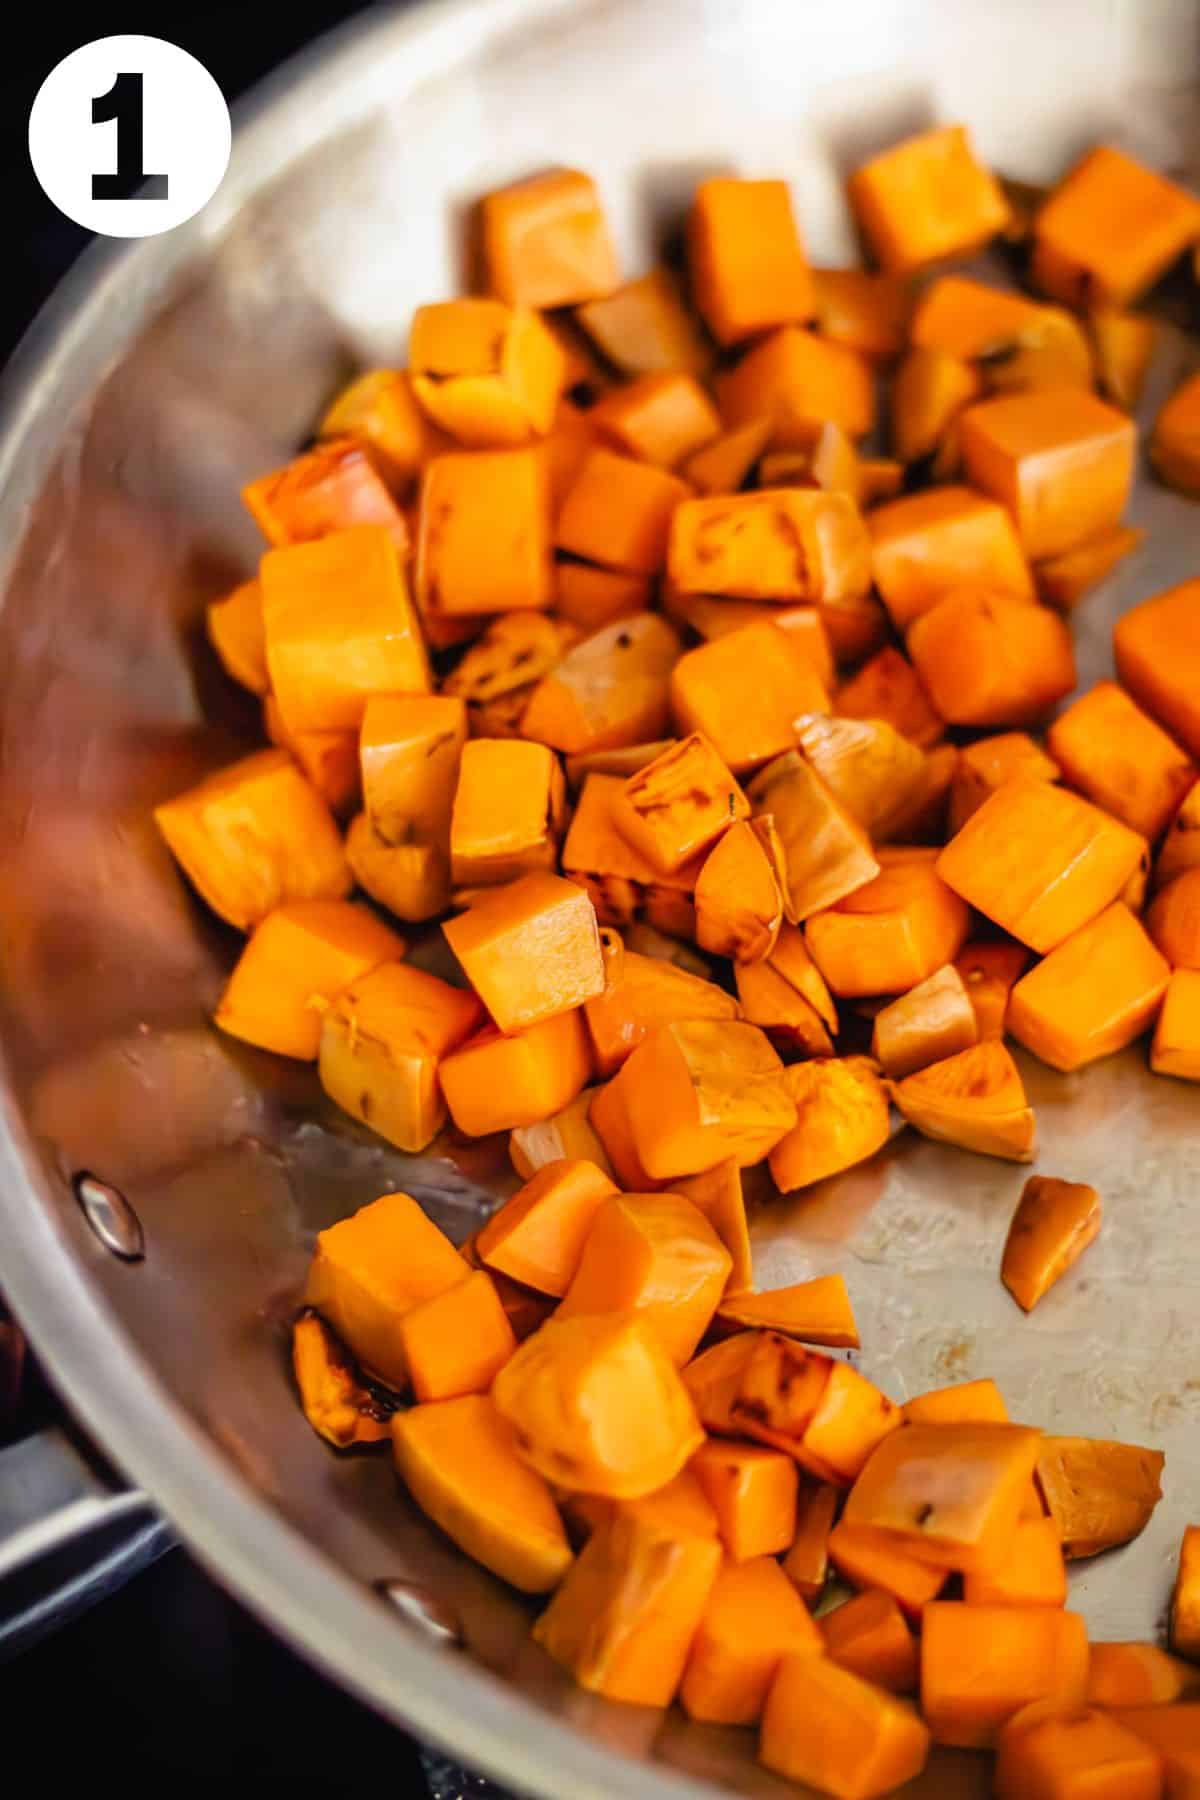 Browned sweet potato cubes in a skillet. The photo is labeled with a number "1."